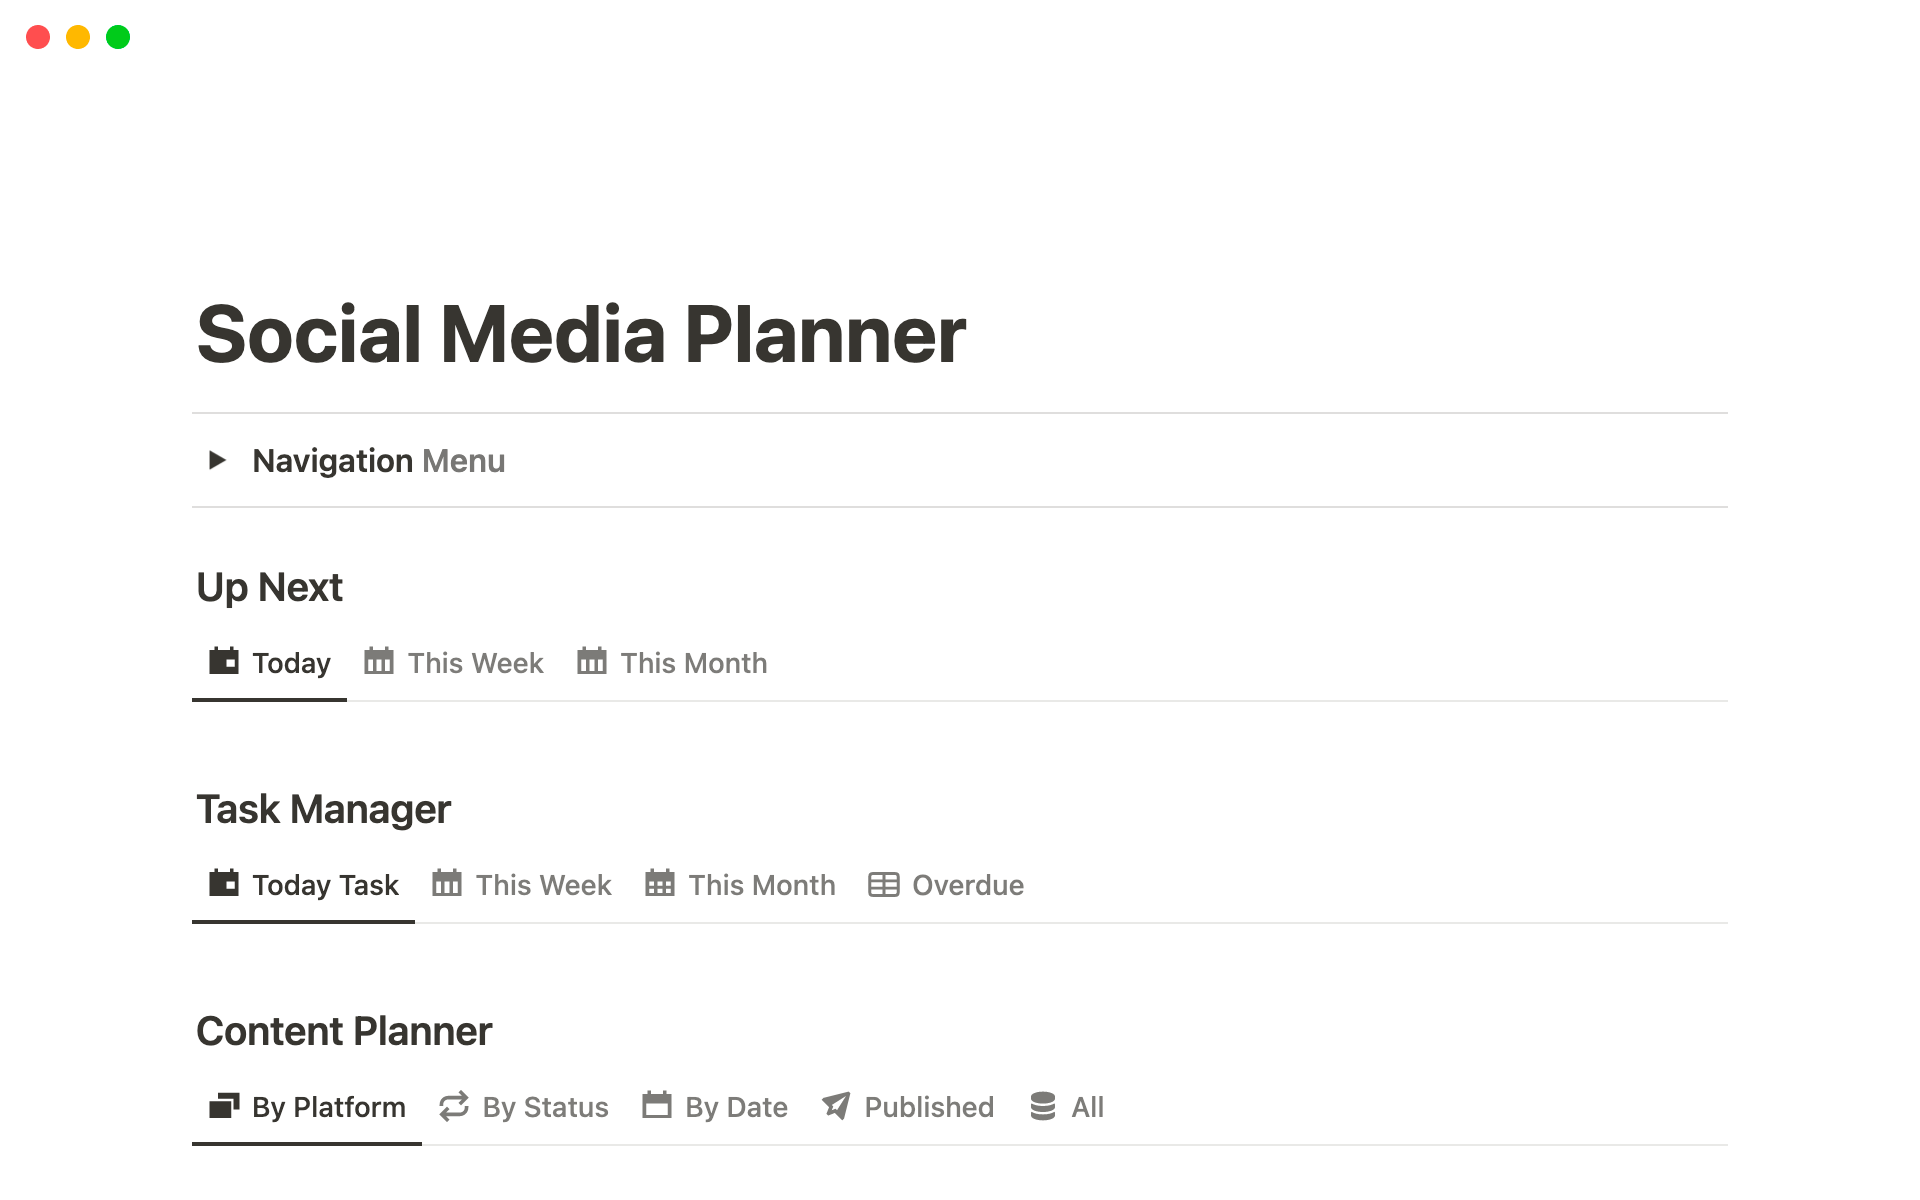 Streamline your Social Media Content and Grow your audience faster with Notion Social Media Planner.